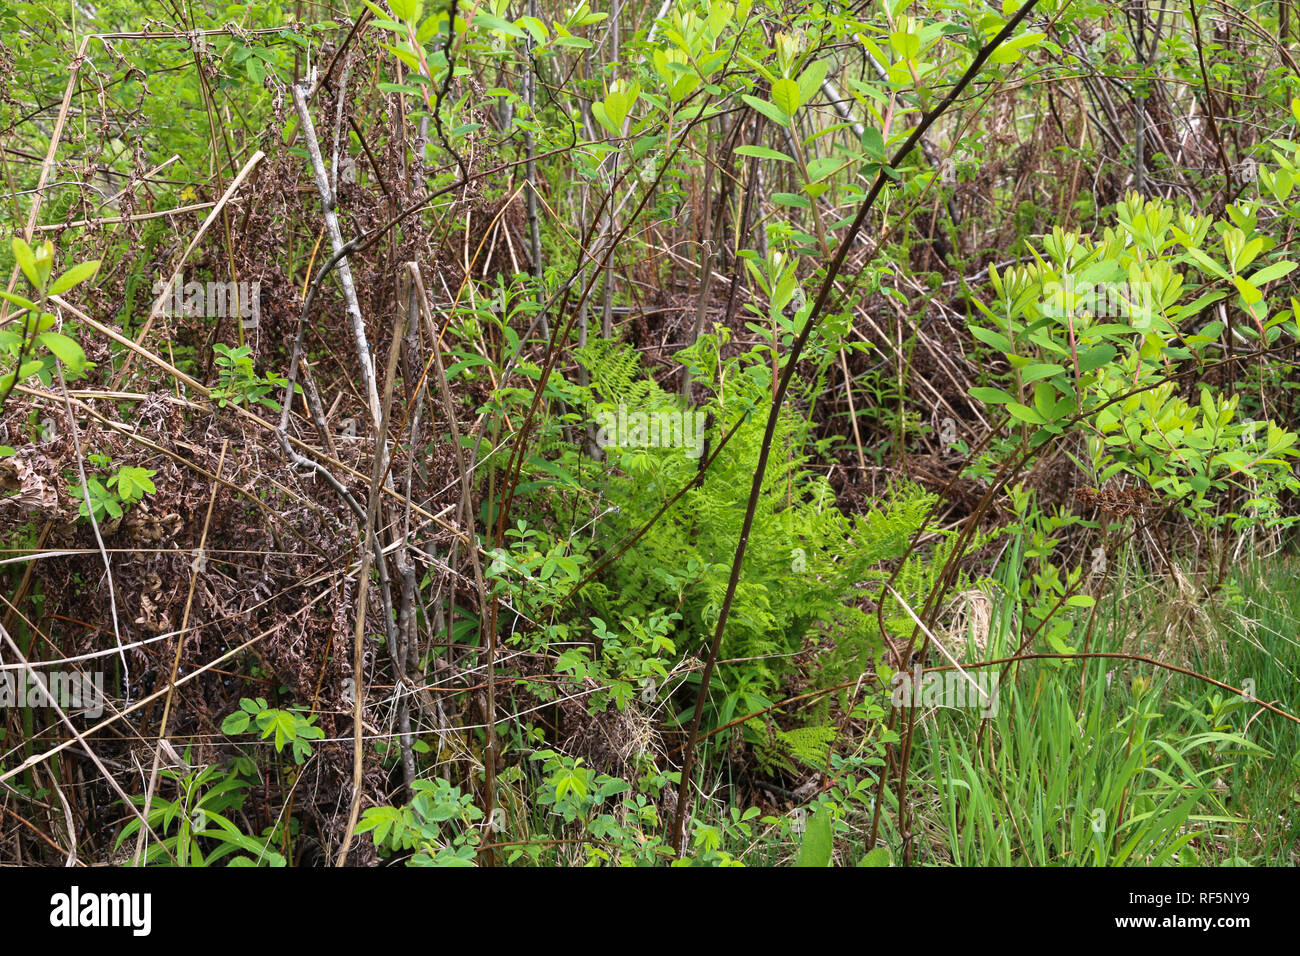 foliage and brush with grass, ferns and dried leaves at coldwater lake near the 230A Mt St Helens Volcanic Observatory trail and scenic view in the Gi Stock Photo